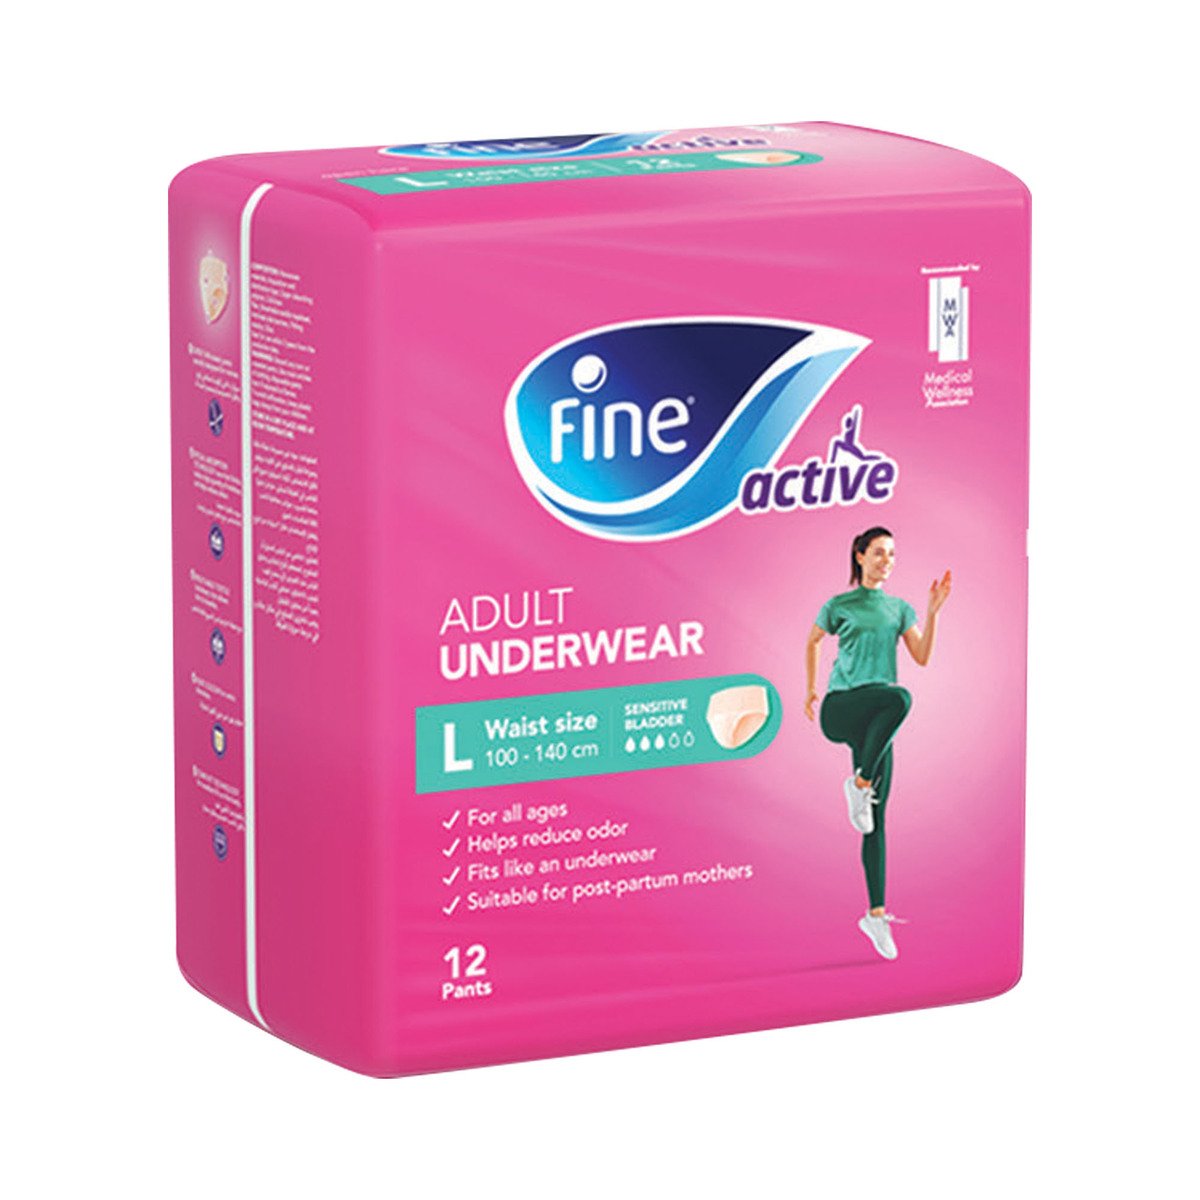 Fine Active Adult Underwear For Women Size Large Waste Size 100